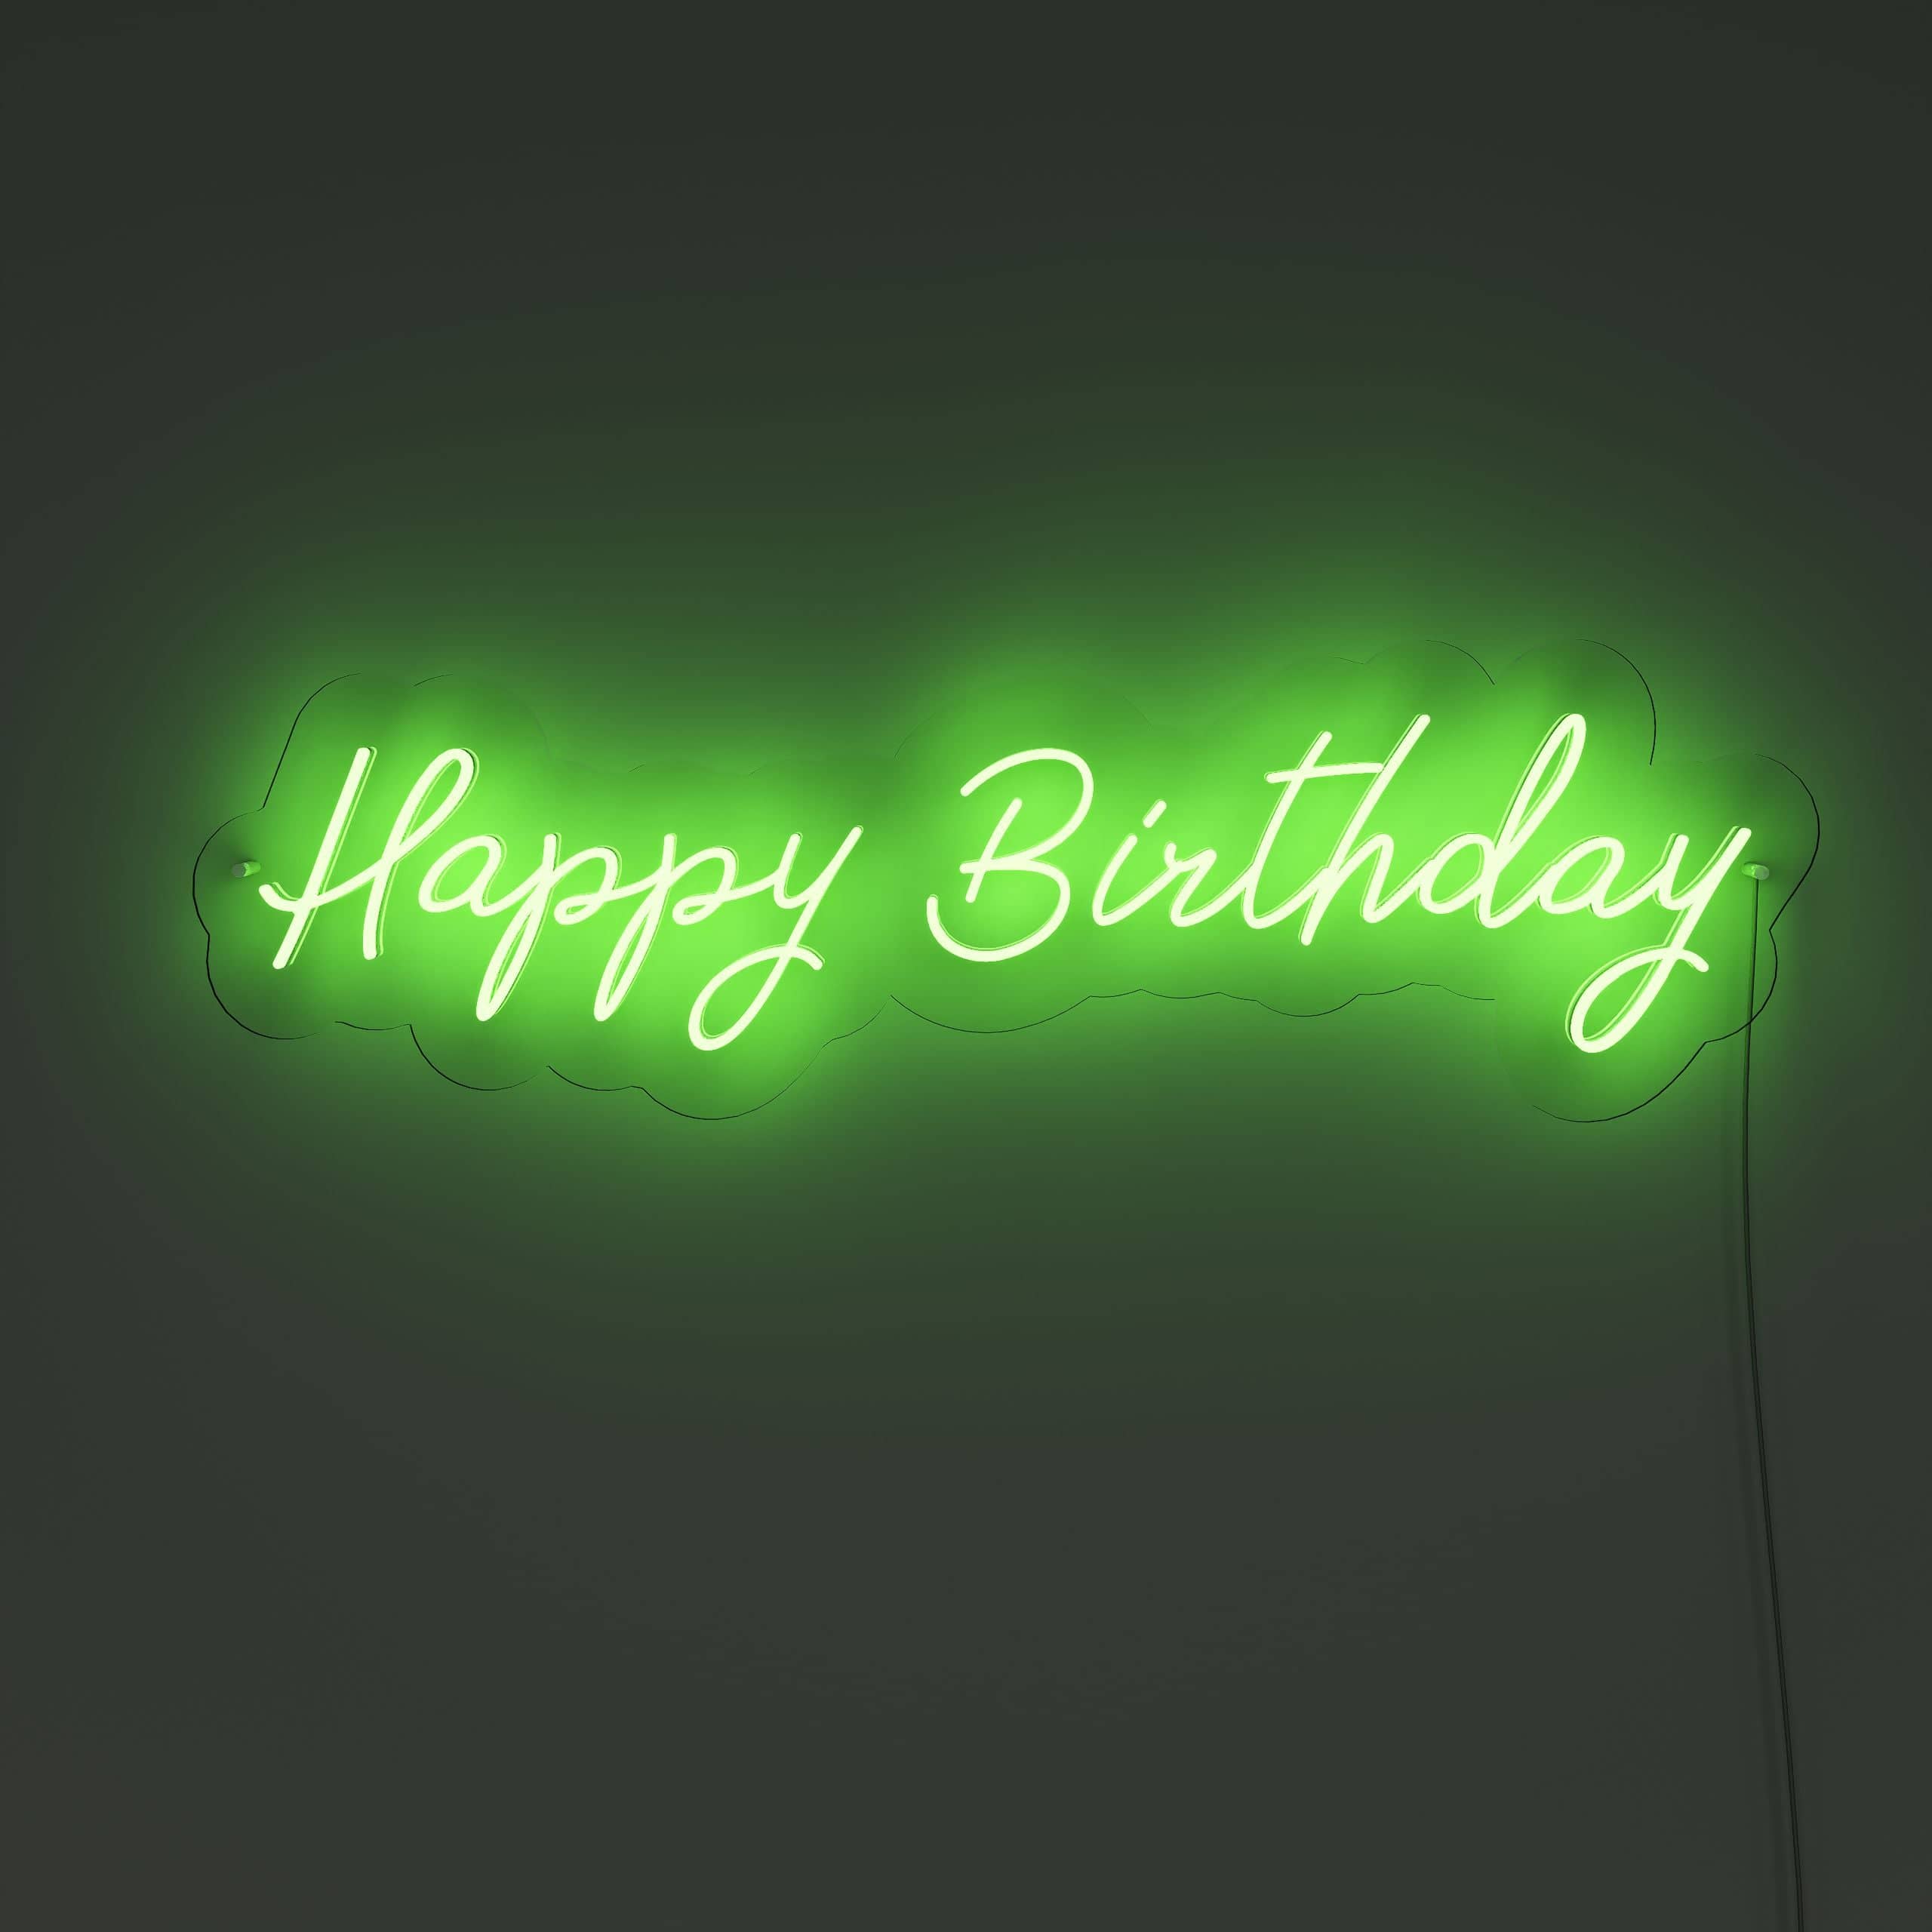 make-a-statement-with-a-neon-birthday-sign!-neon-sign-lite